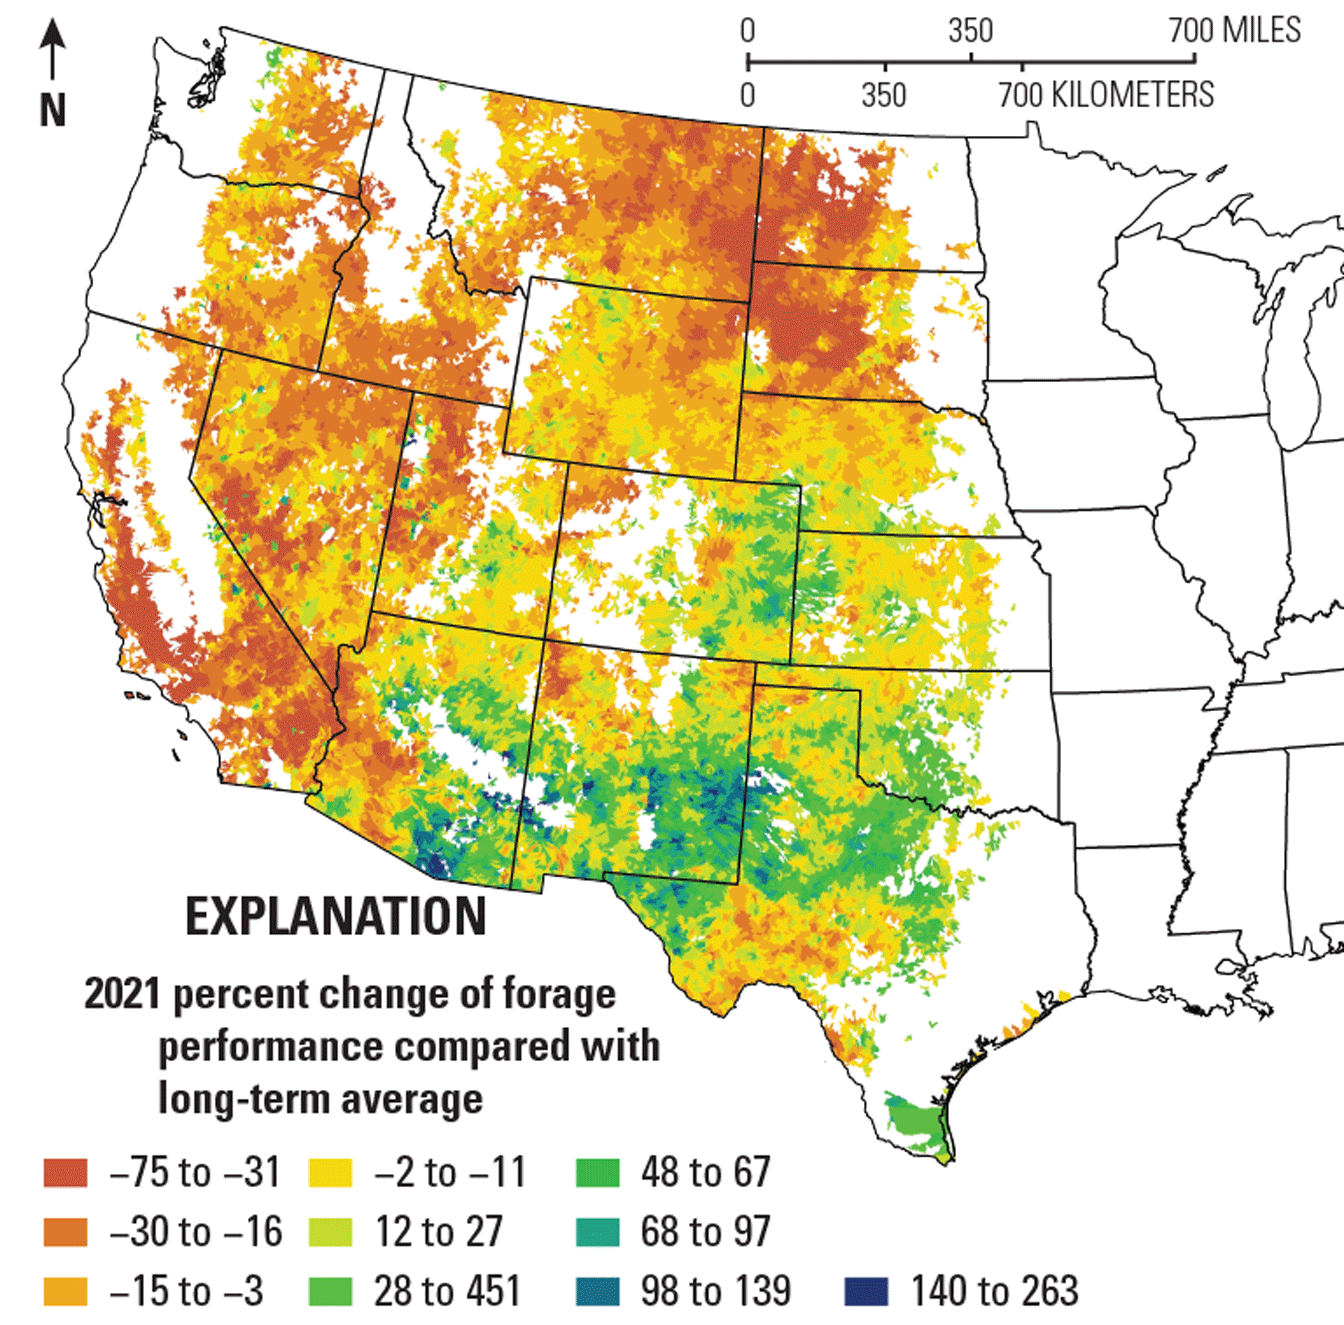 Forage performance of cheatgrass/exotic annual grass has mostly decreased in the western
                     United States.